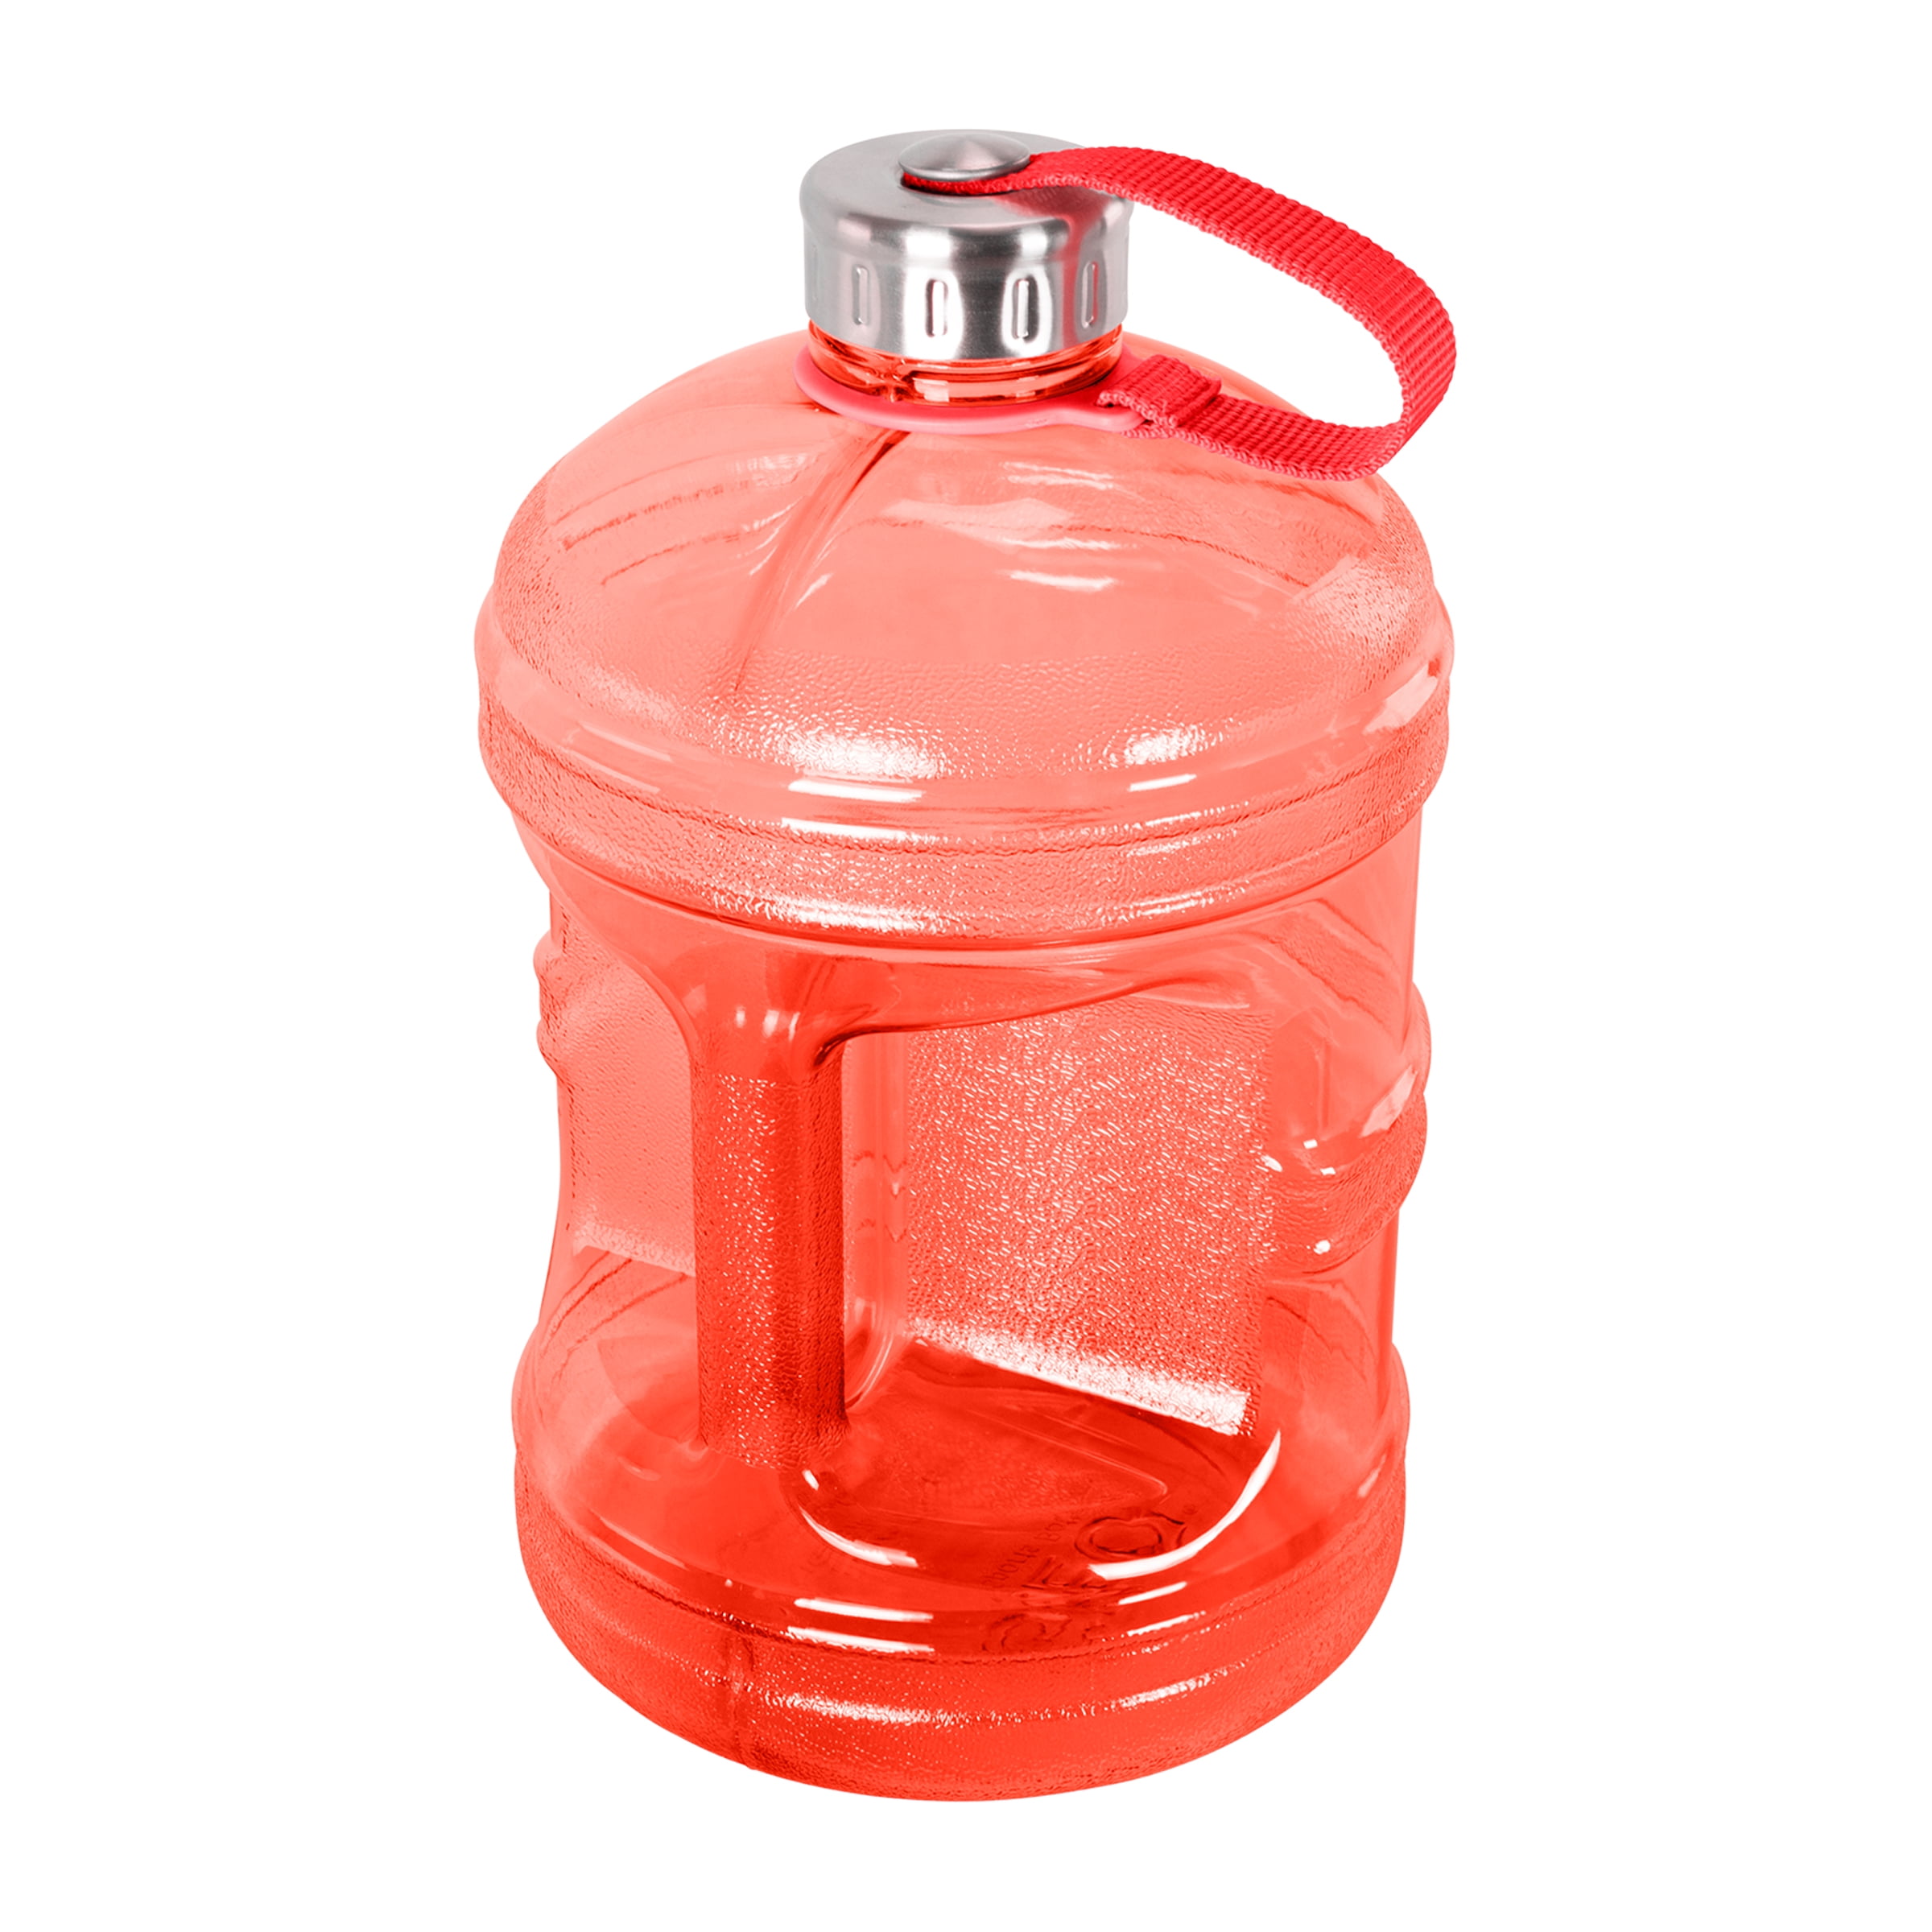 Geo sports bottles 1 gal Red Stainless Steel Water Bottle with Wide Mouth  Lid 